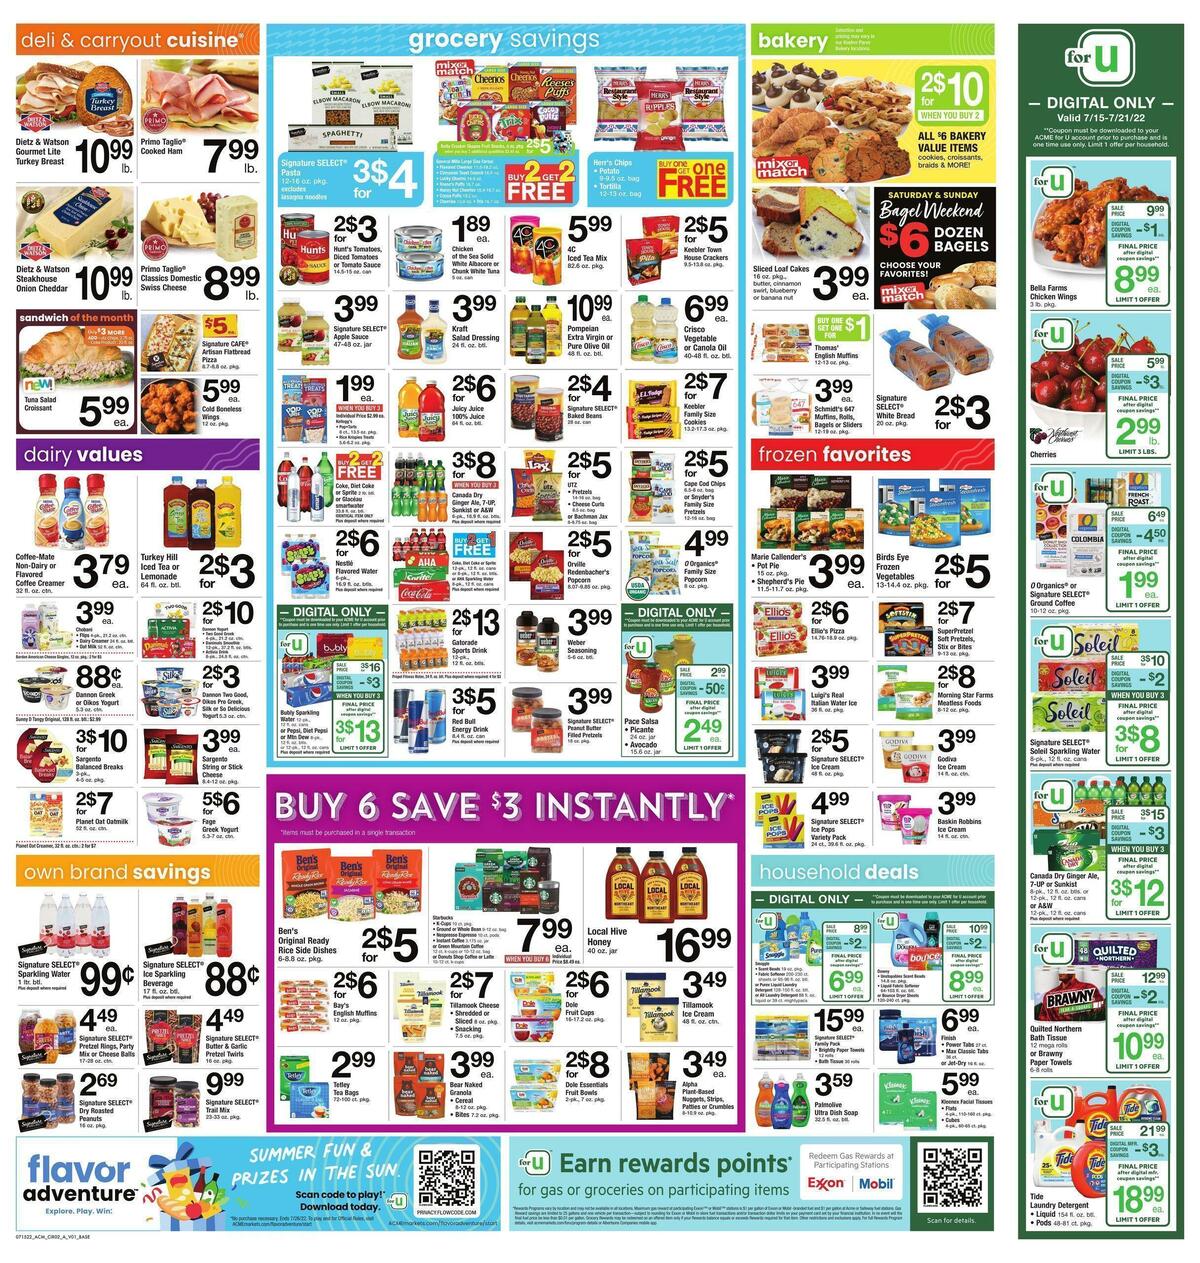 ACME Markets Weekly Ad from July 15